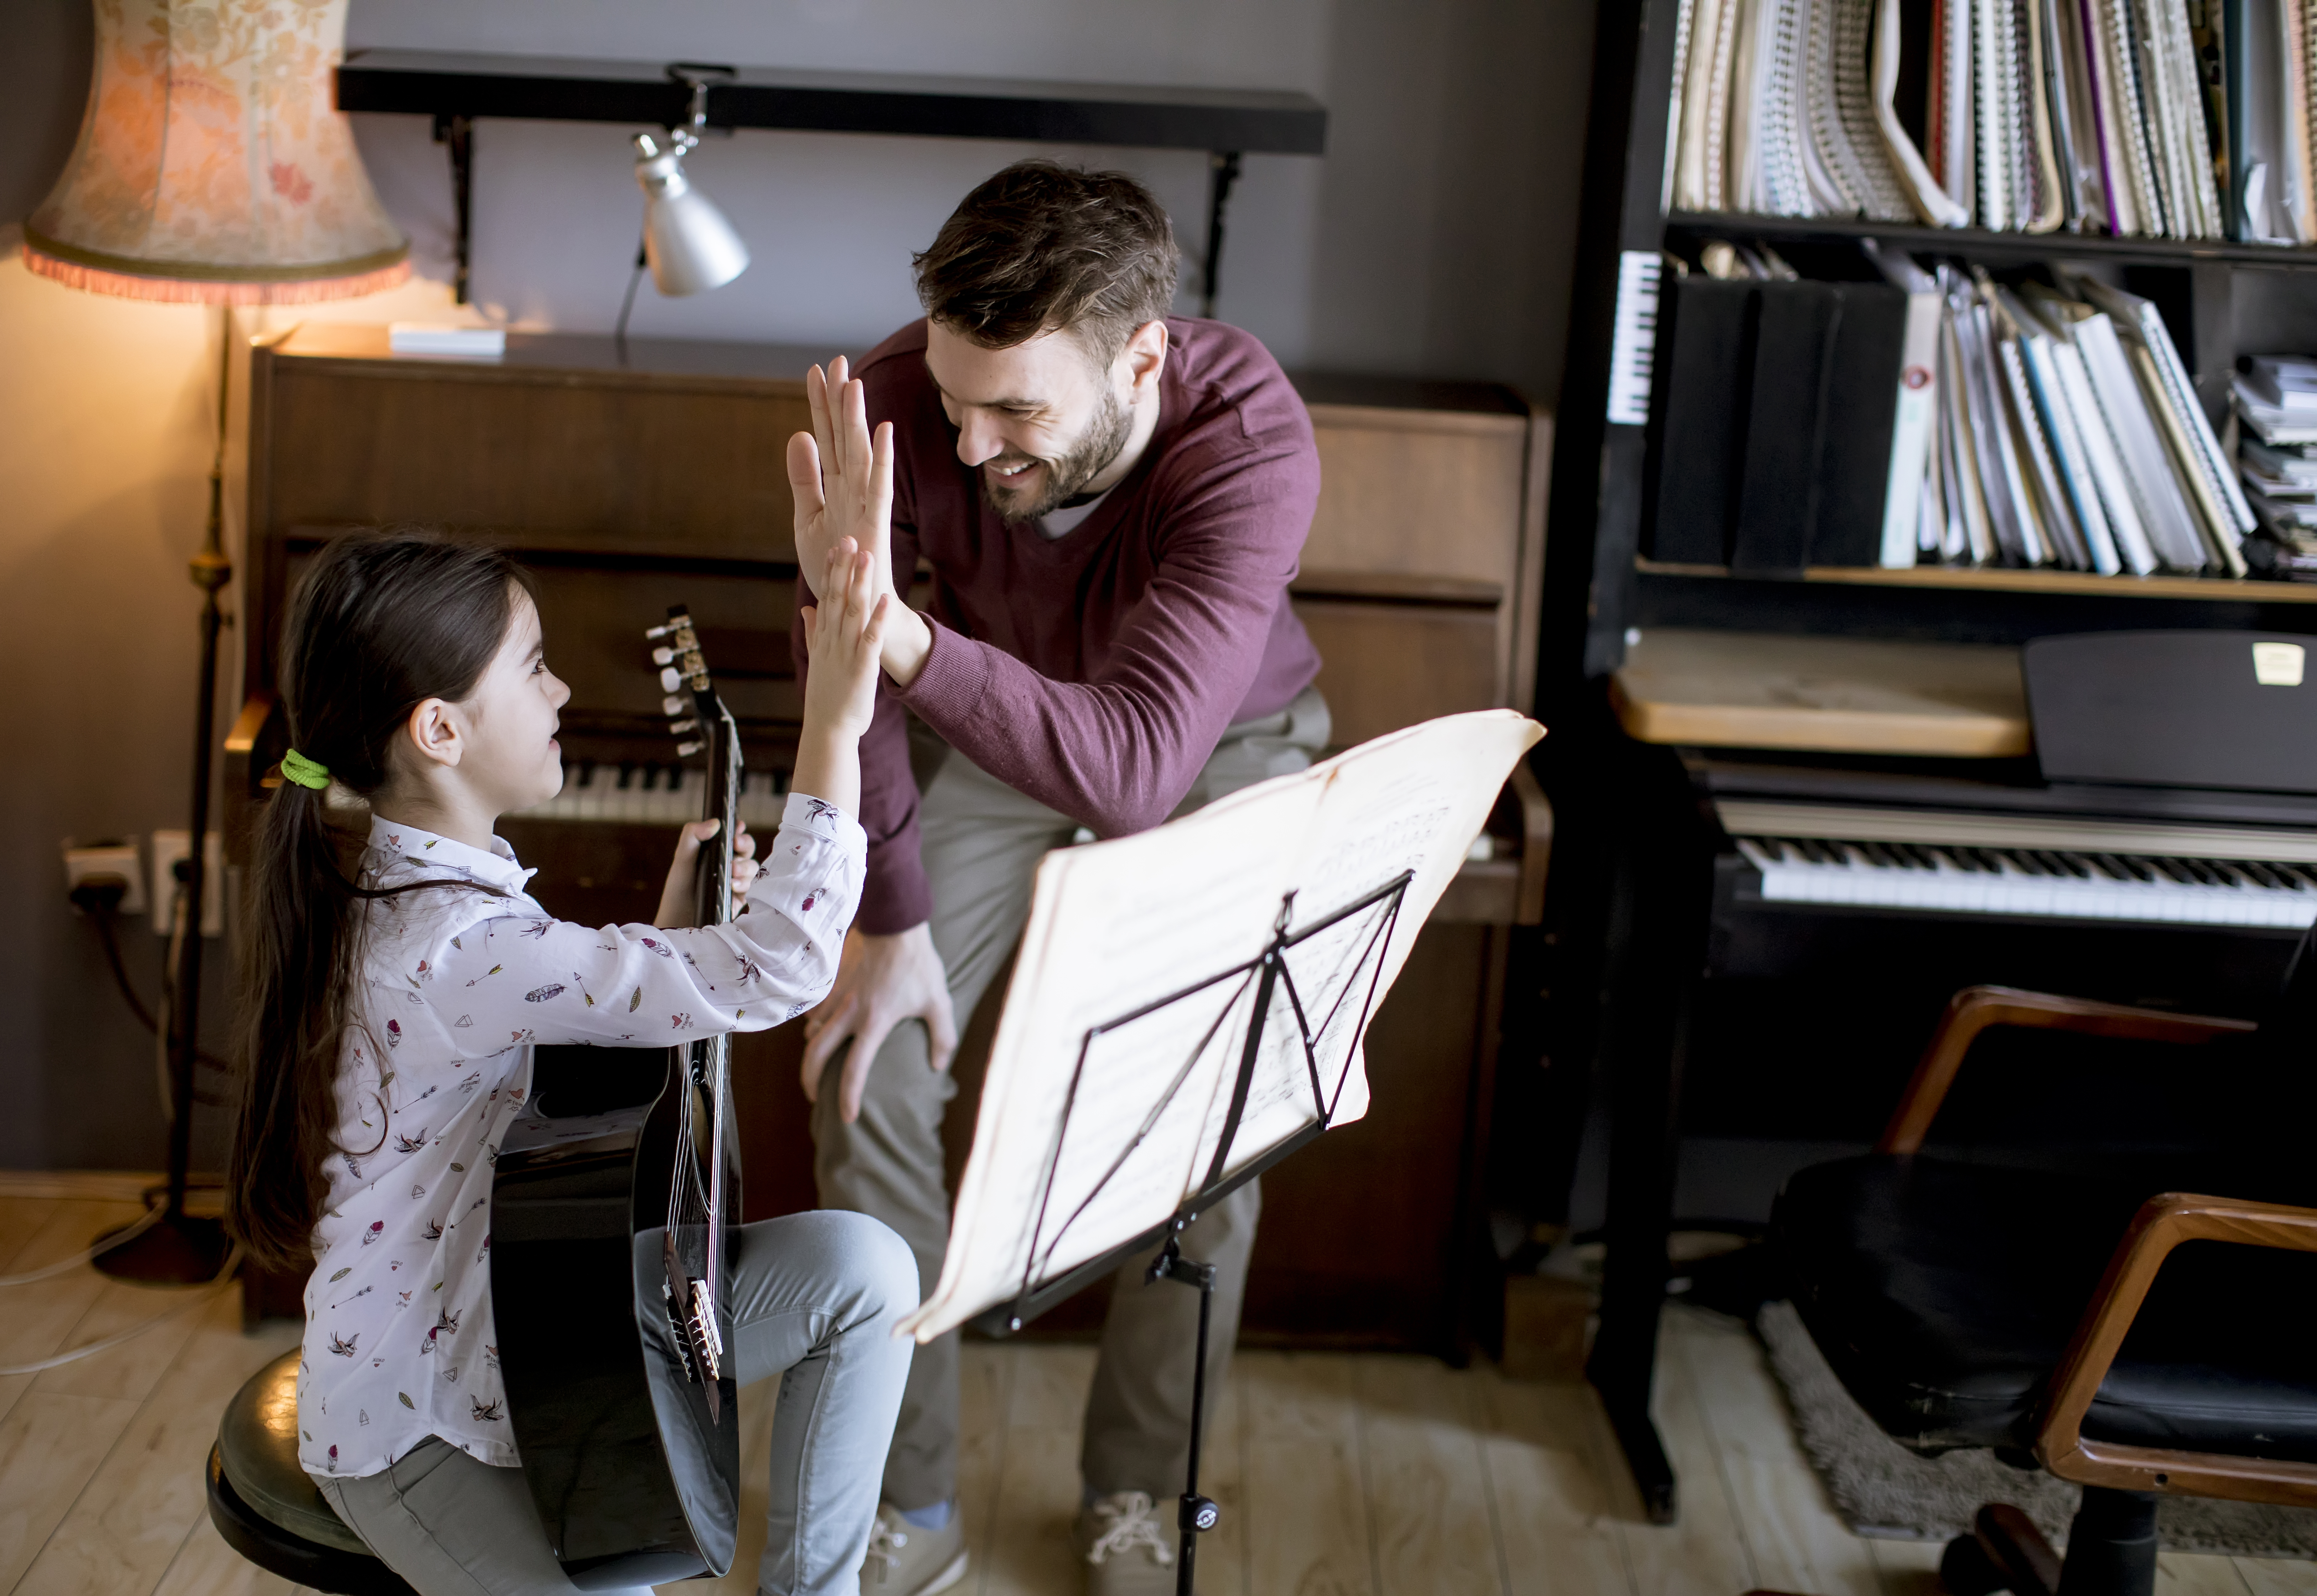 Little girl playing guitar with her music teacher in the rustic apartment